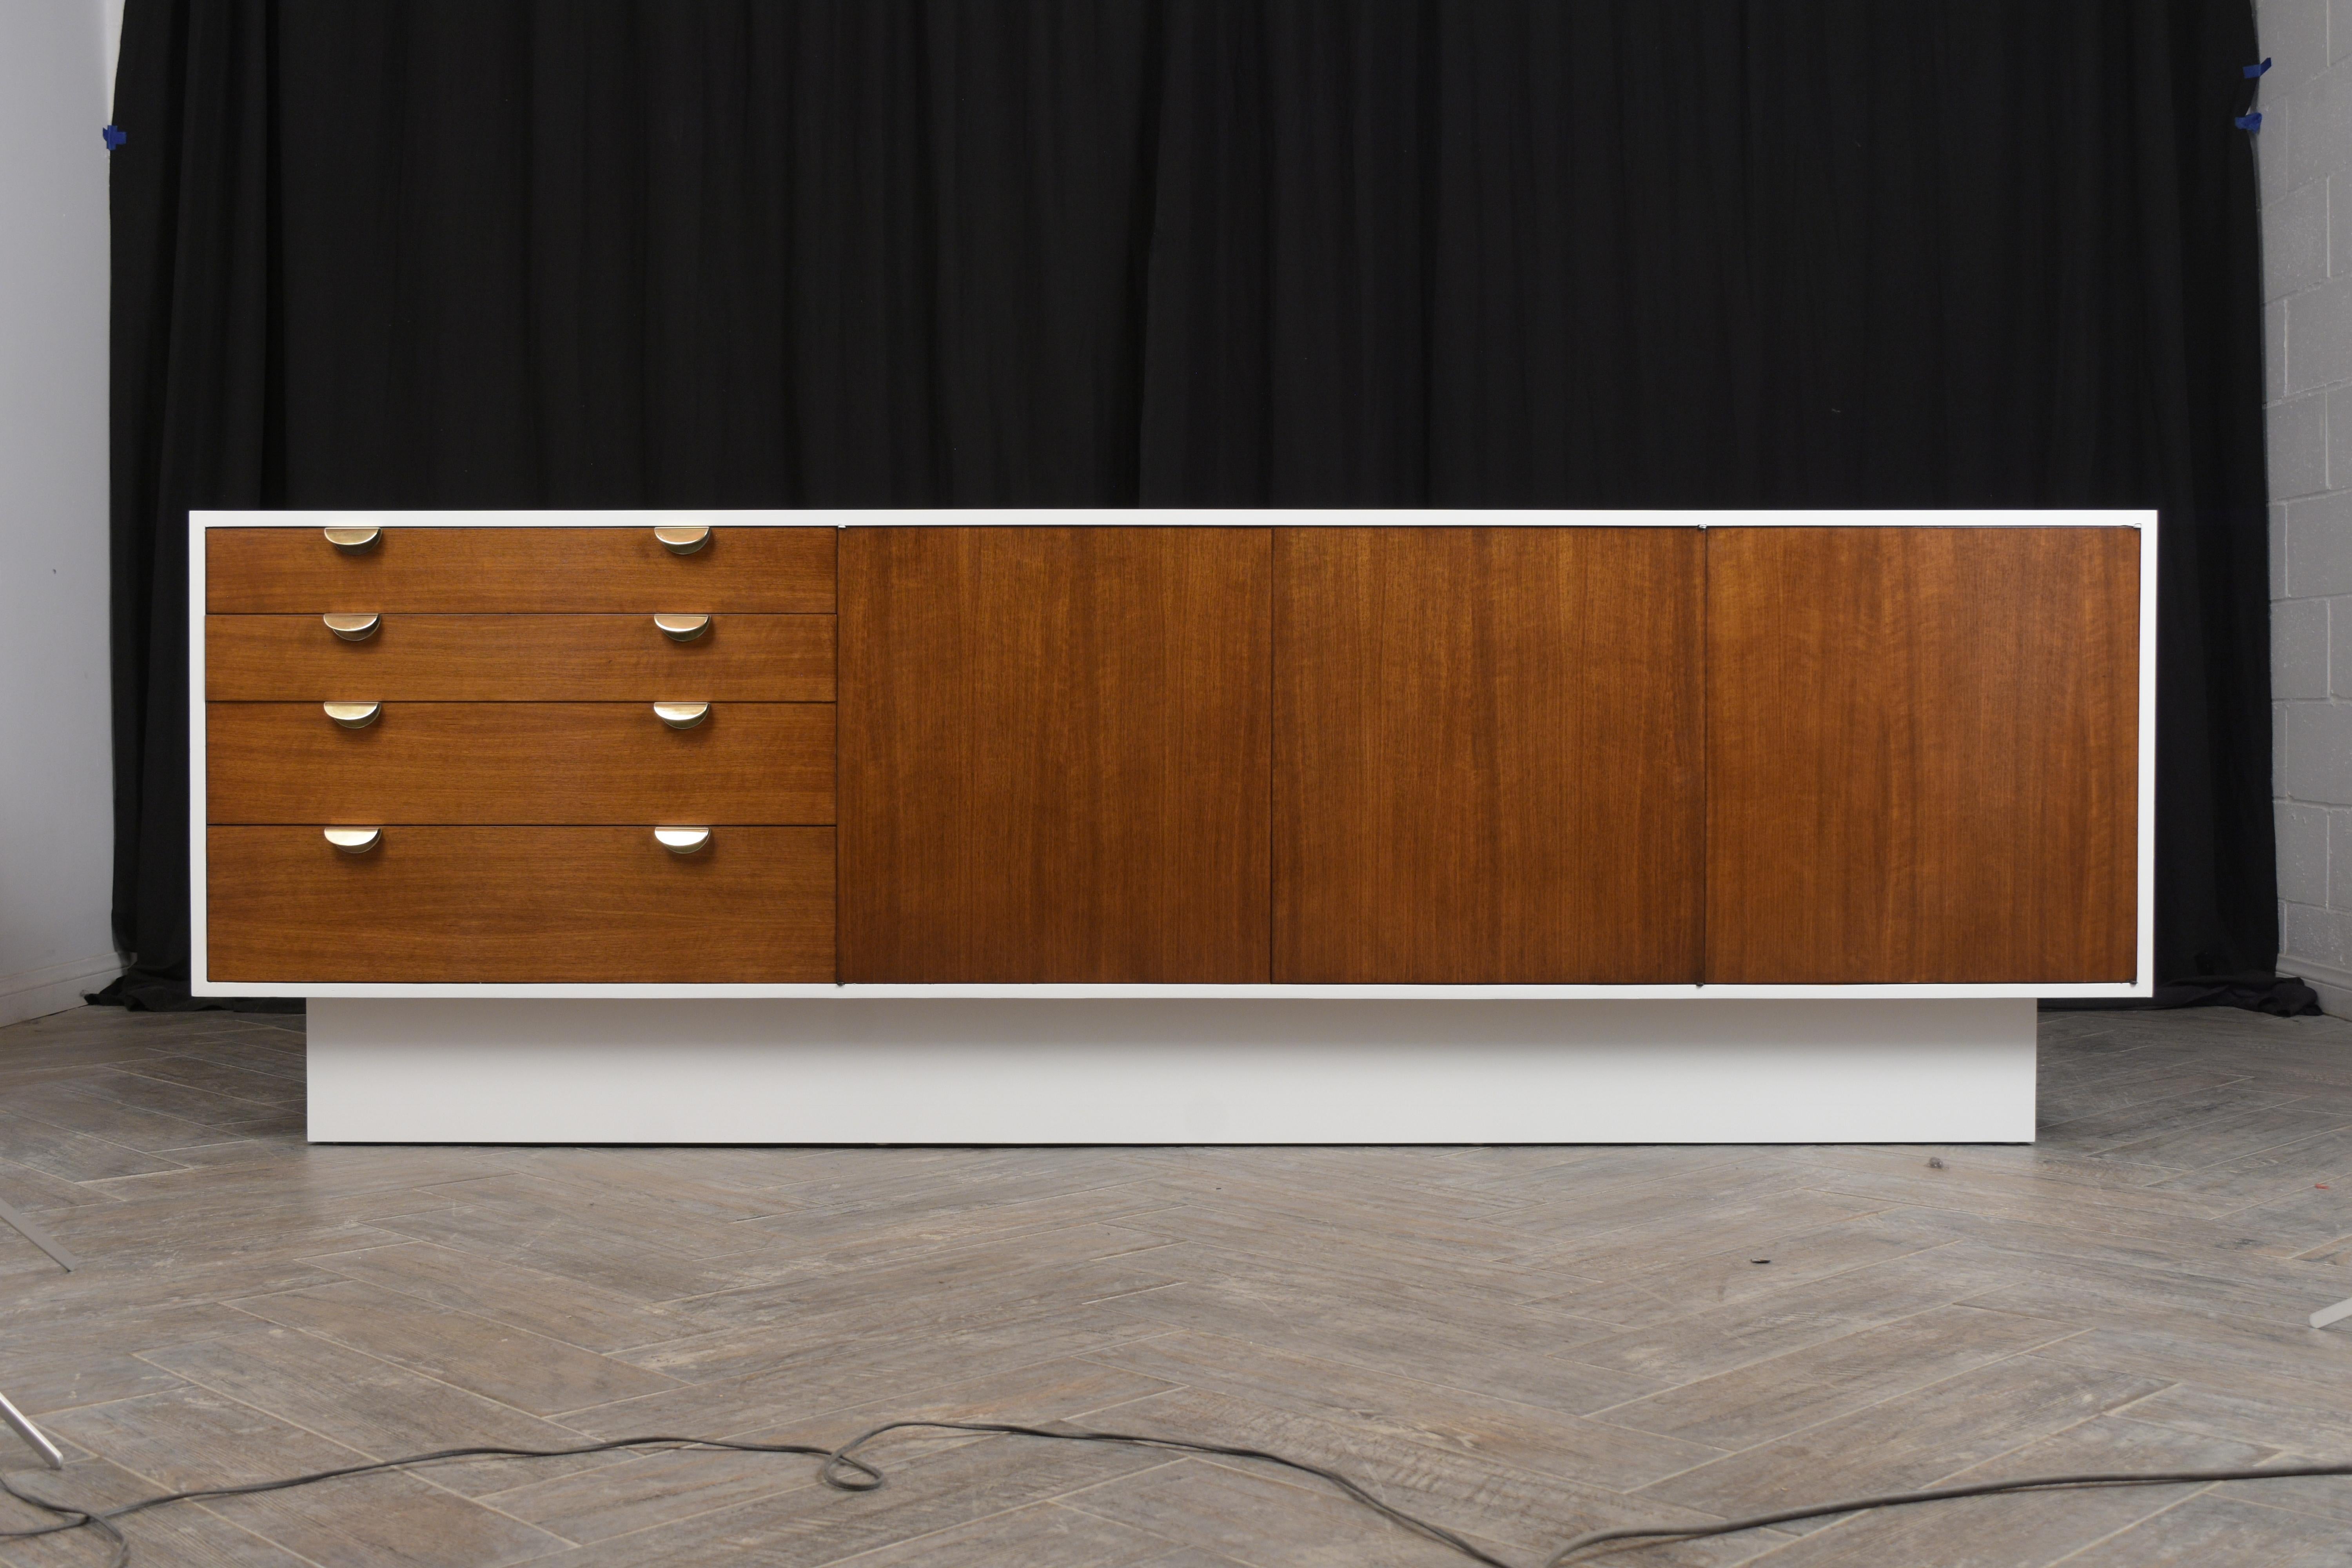 This large Mid-Century Modern credenza has been professionally restored, stained in walnut and white combination, and has a newly lacquered finish. The credenza features four top drawers with dual sold brass handles, two center doors with two